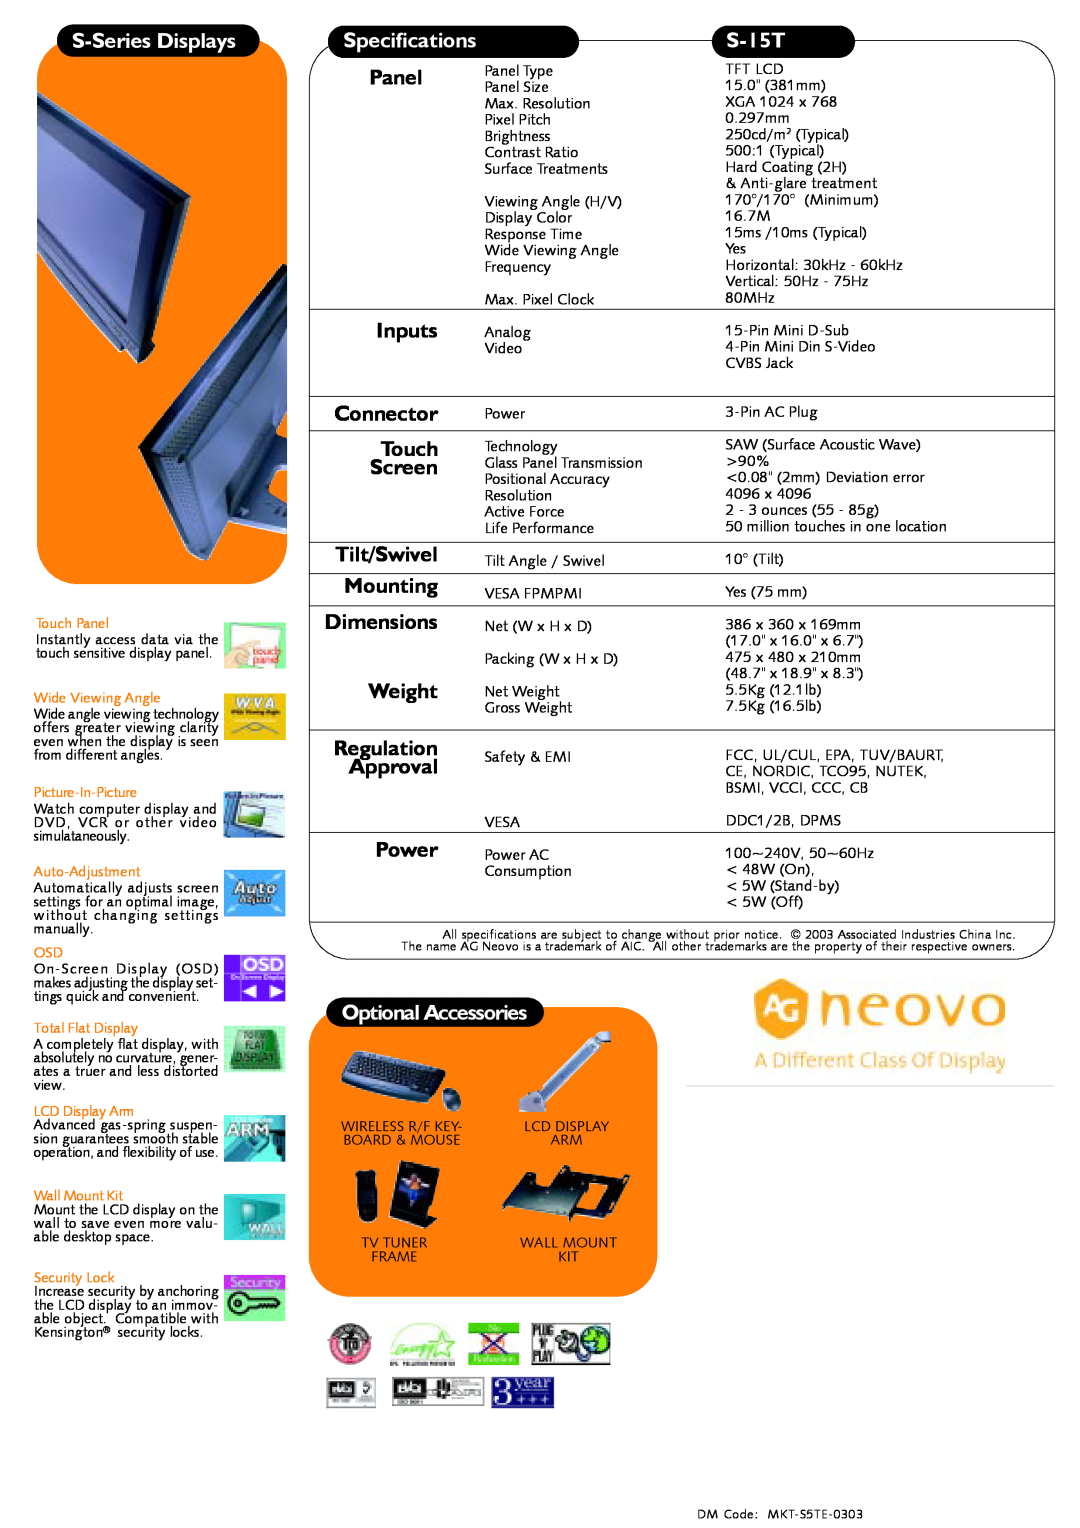 AG Neovo S-15T manual S-Series Displays, Specifications, Panel, Optional Accessories 